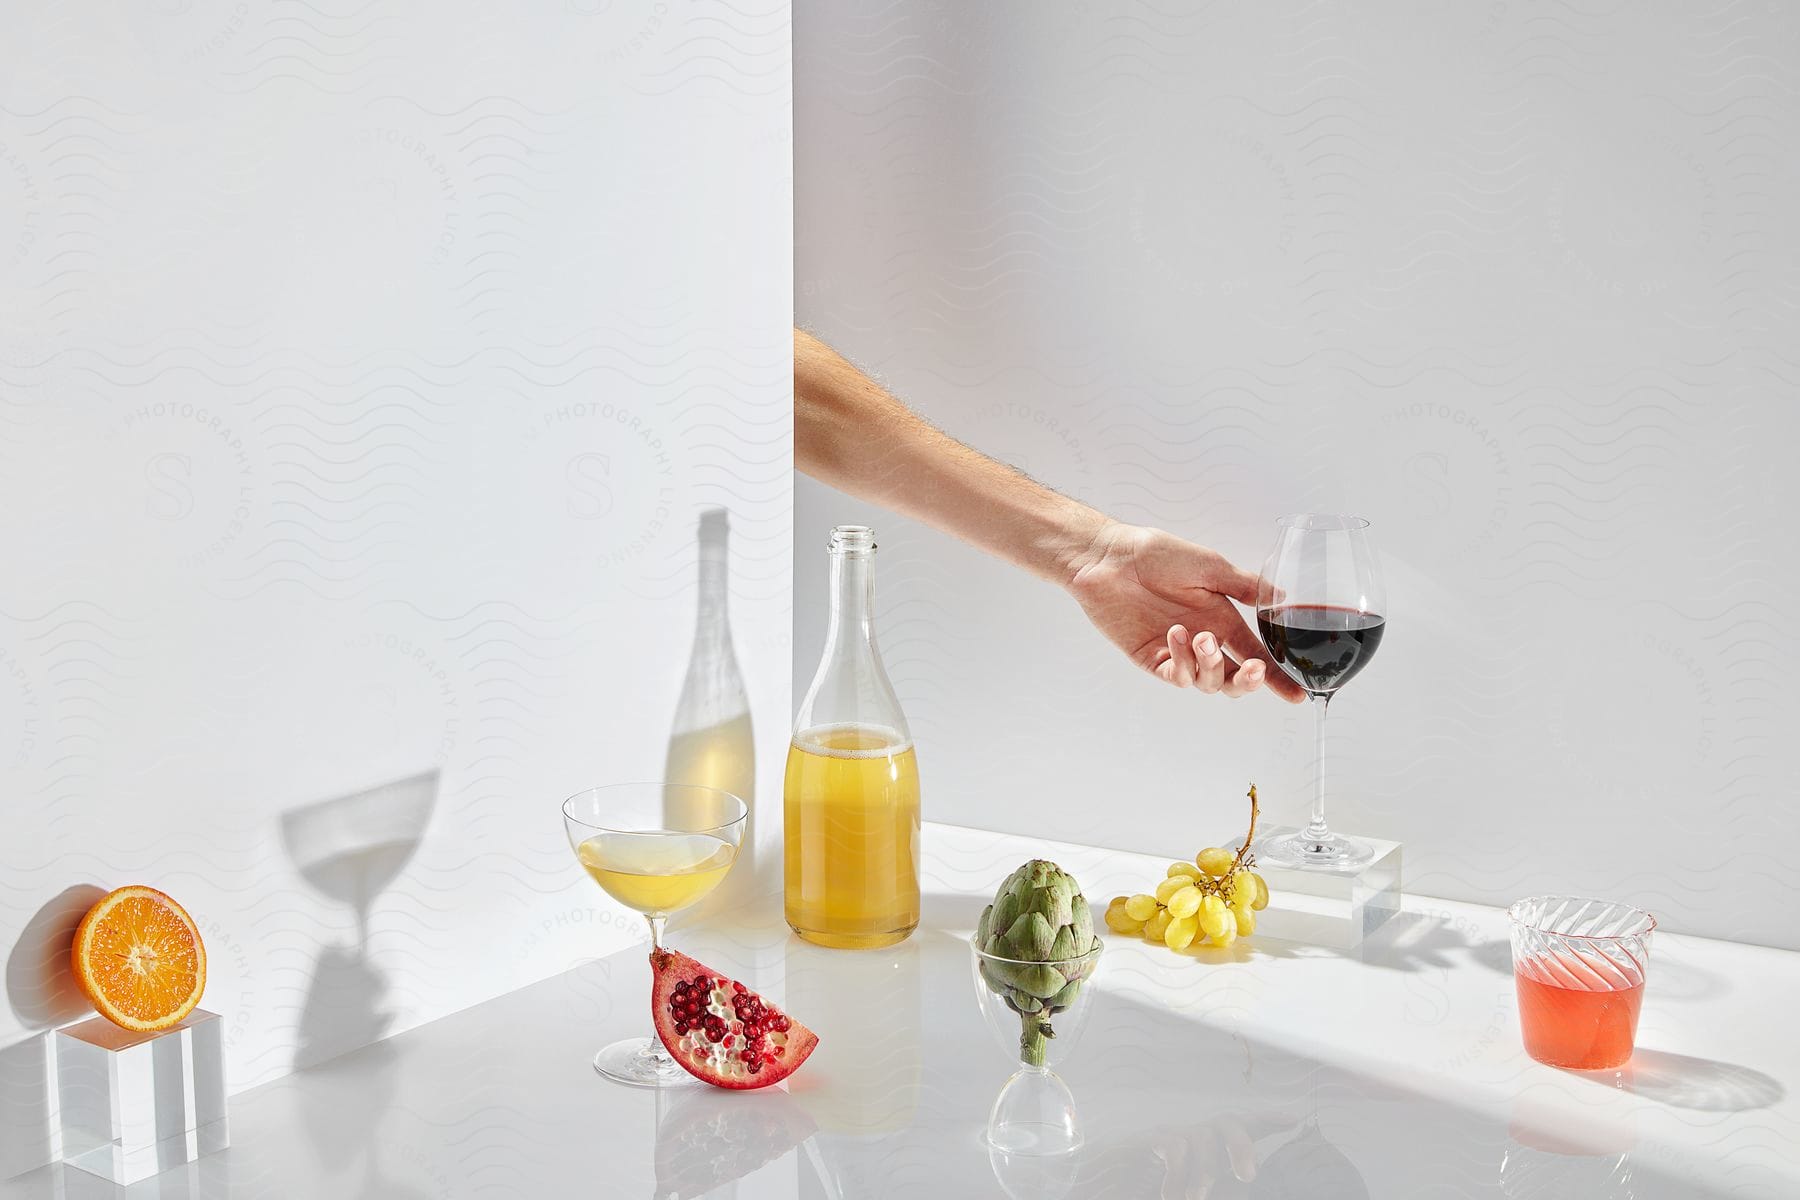 Man places glass of wine into still life of produce and beverages.